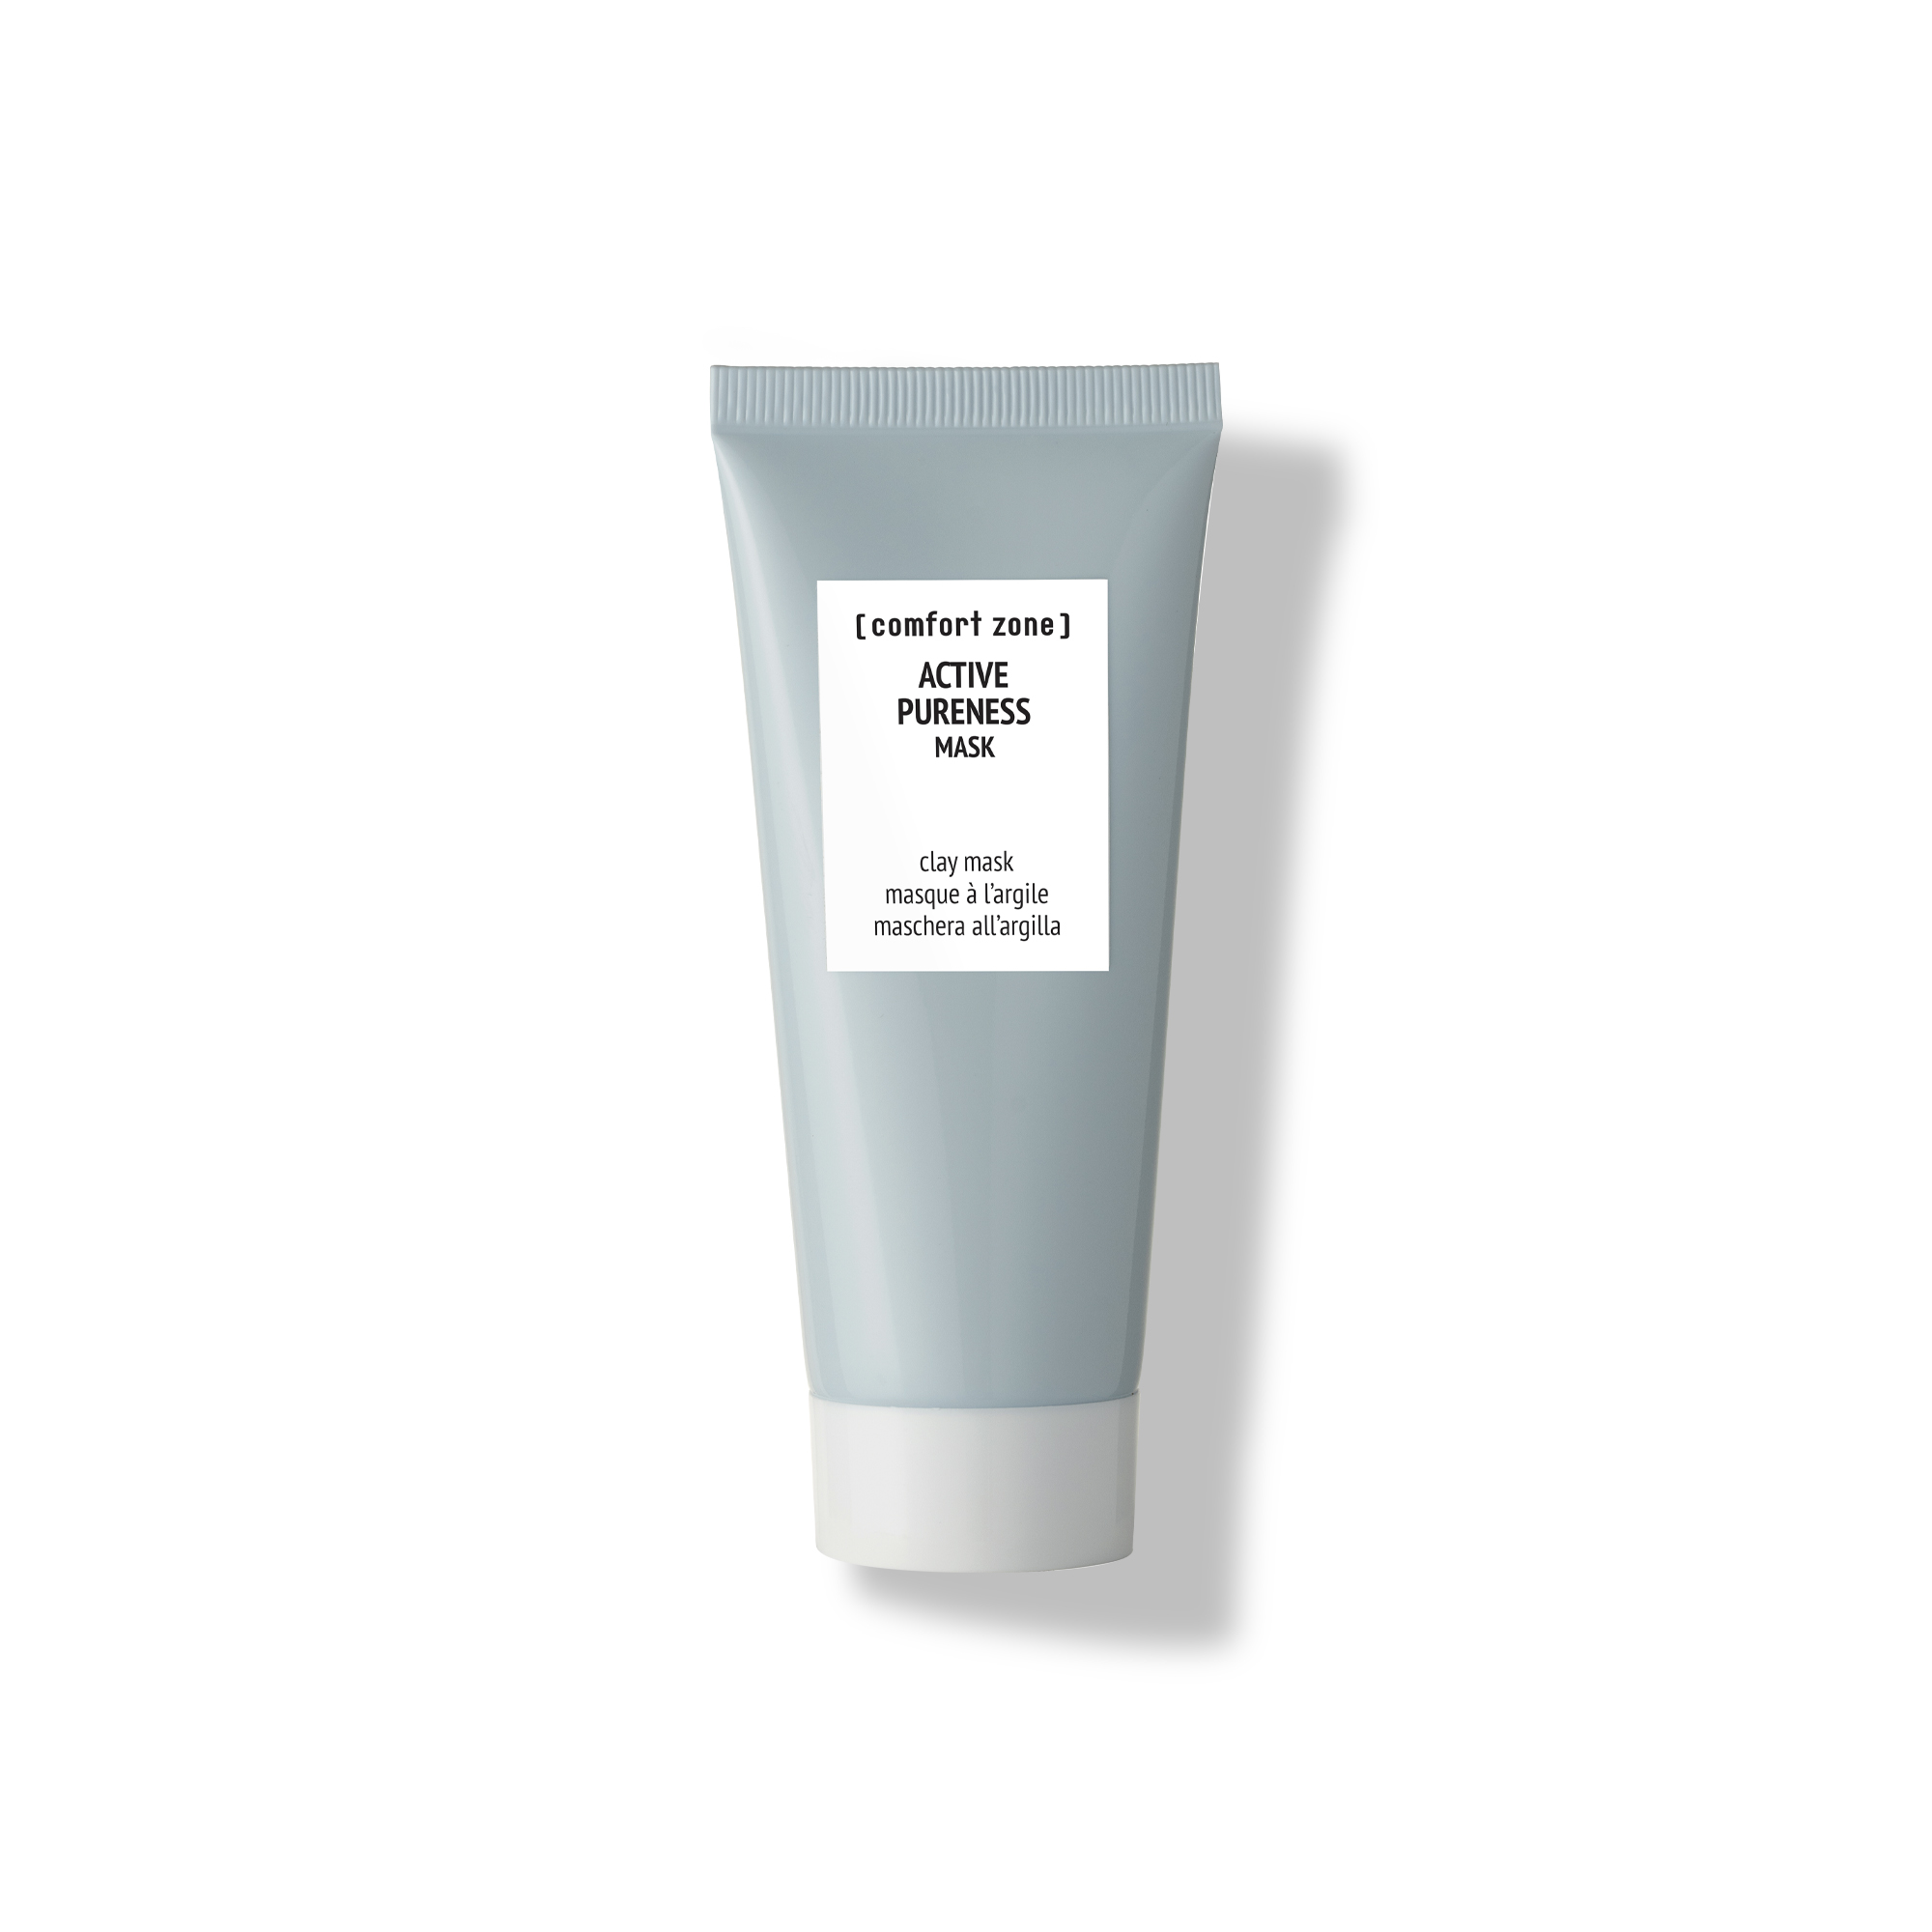 Comfort Zone: ACTIVE PURENESS MASK Mattifying clay mask-
